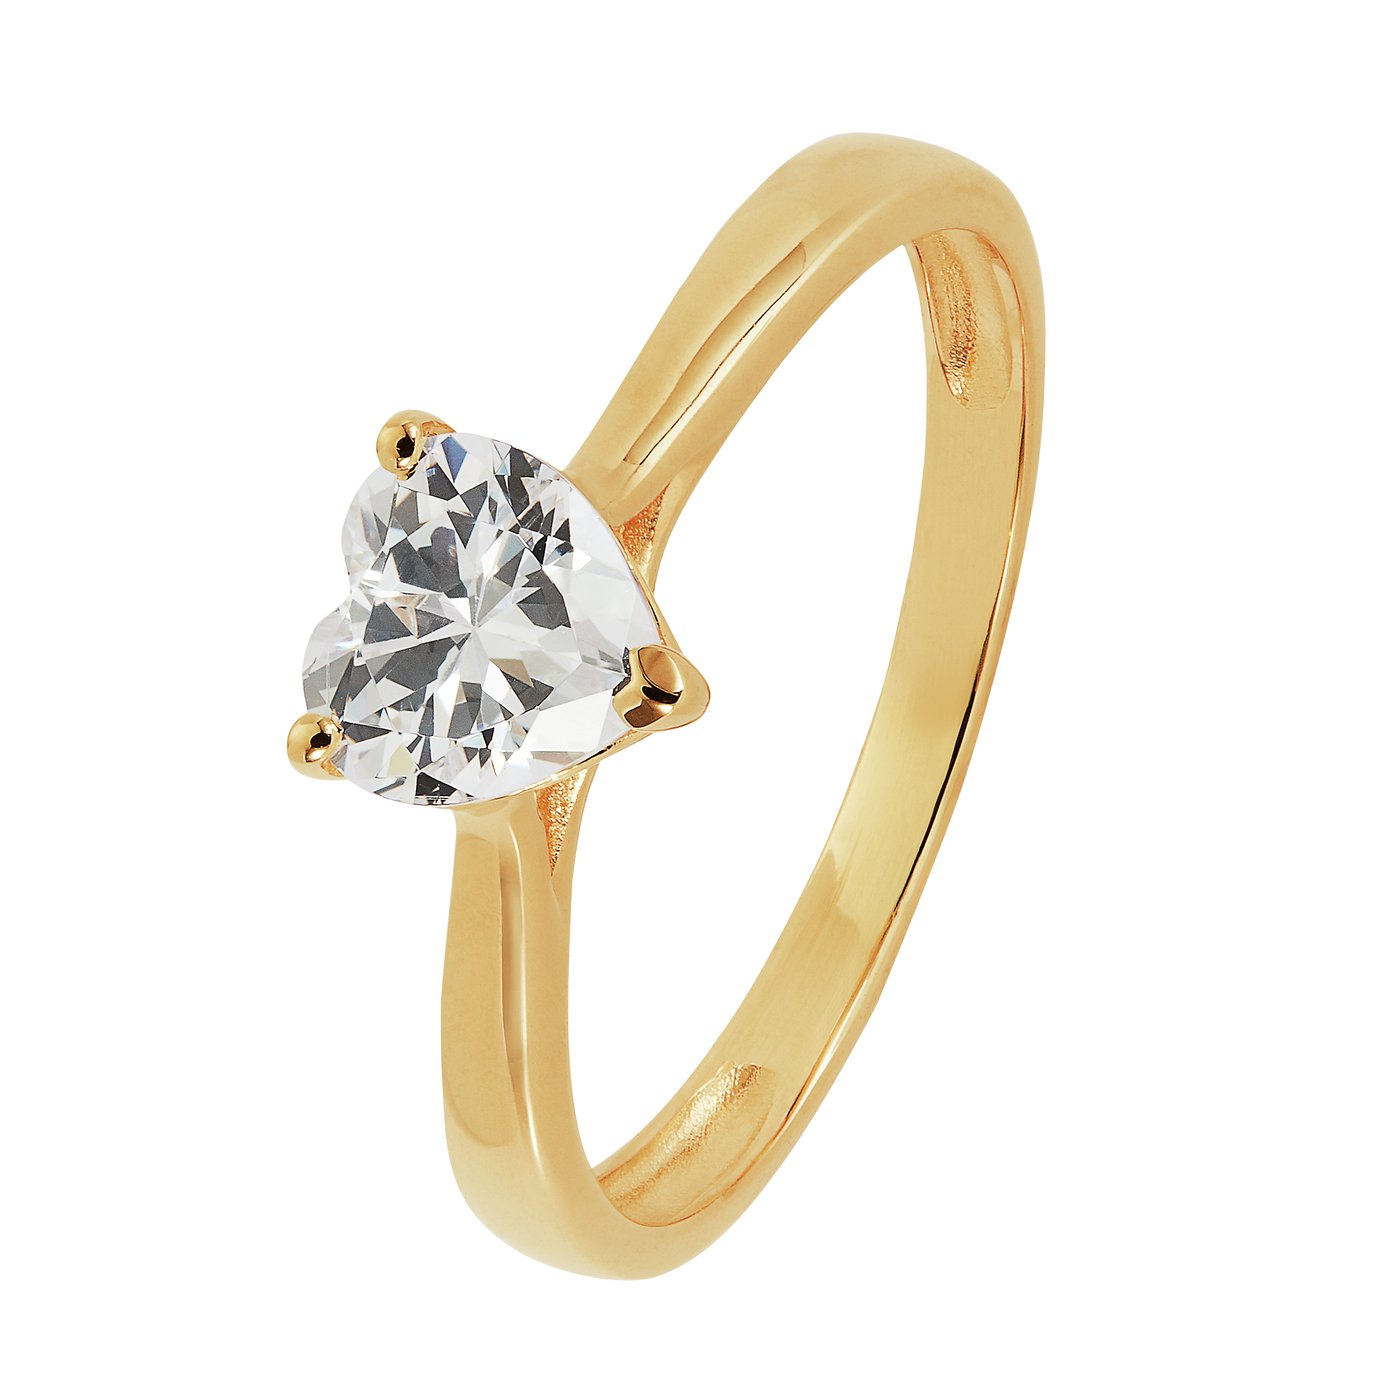 Revere 9ct Gold Cubic Zirconia Engagement Ring - N